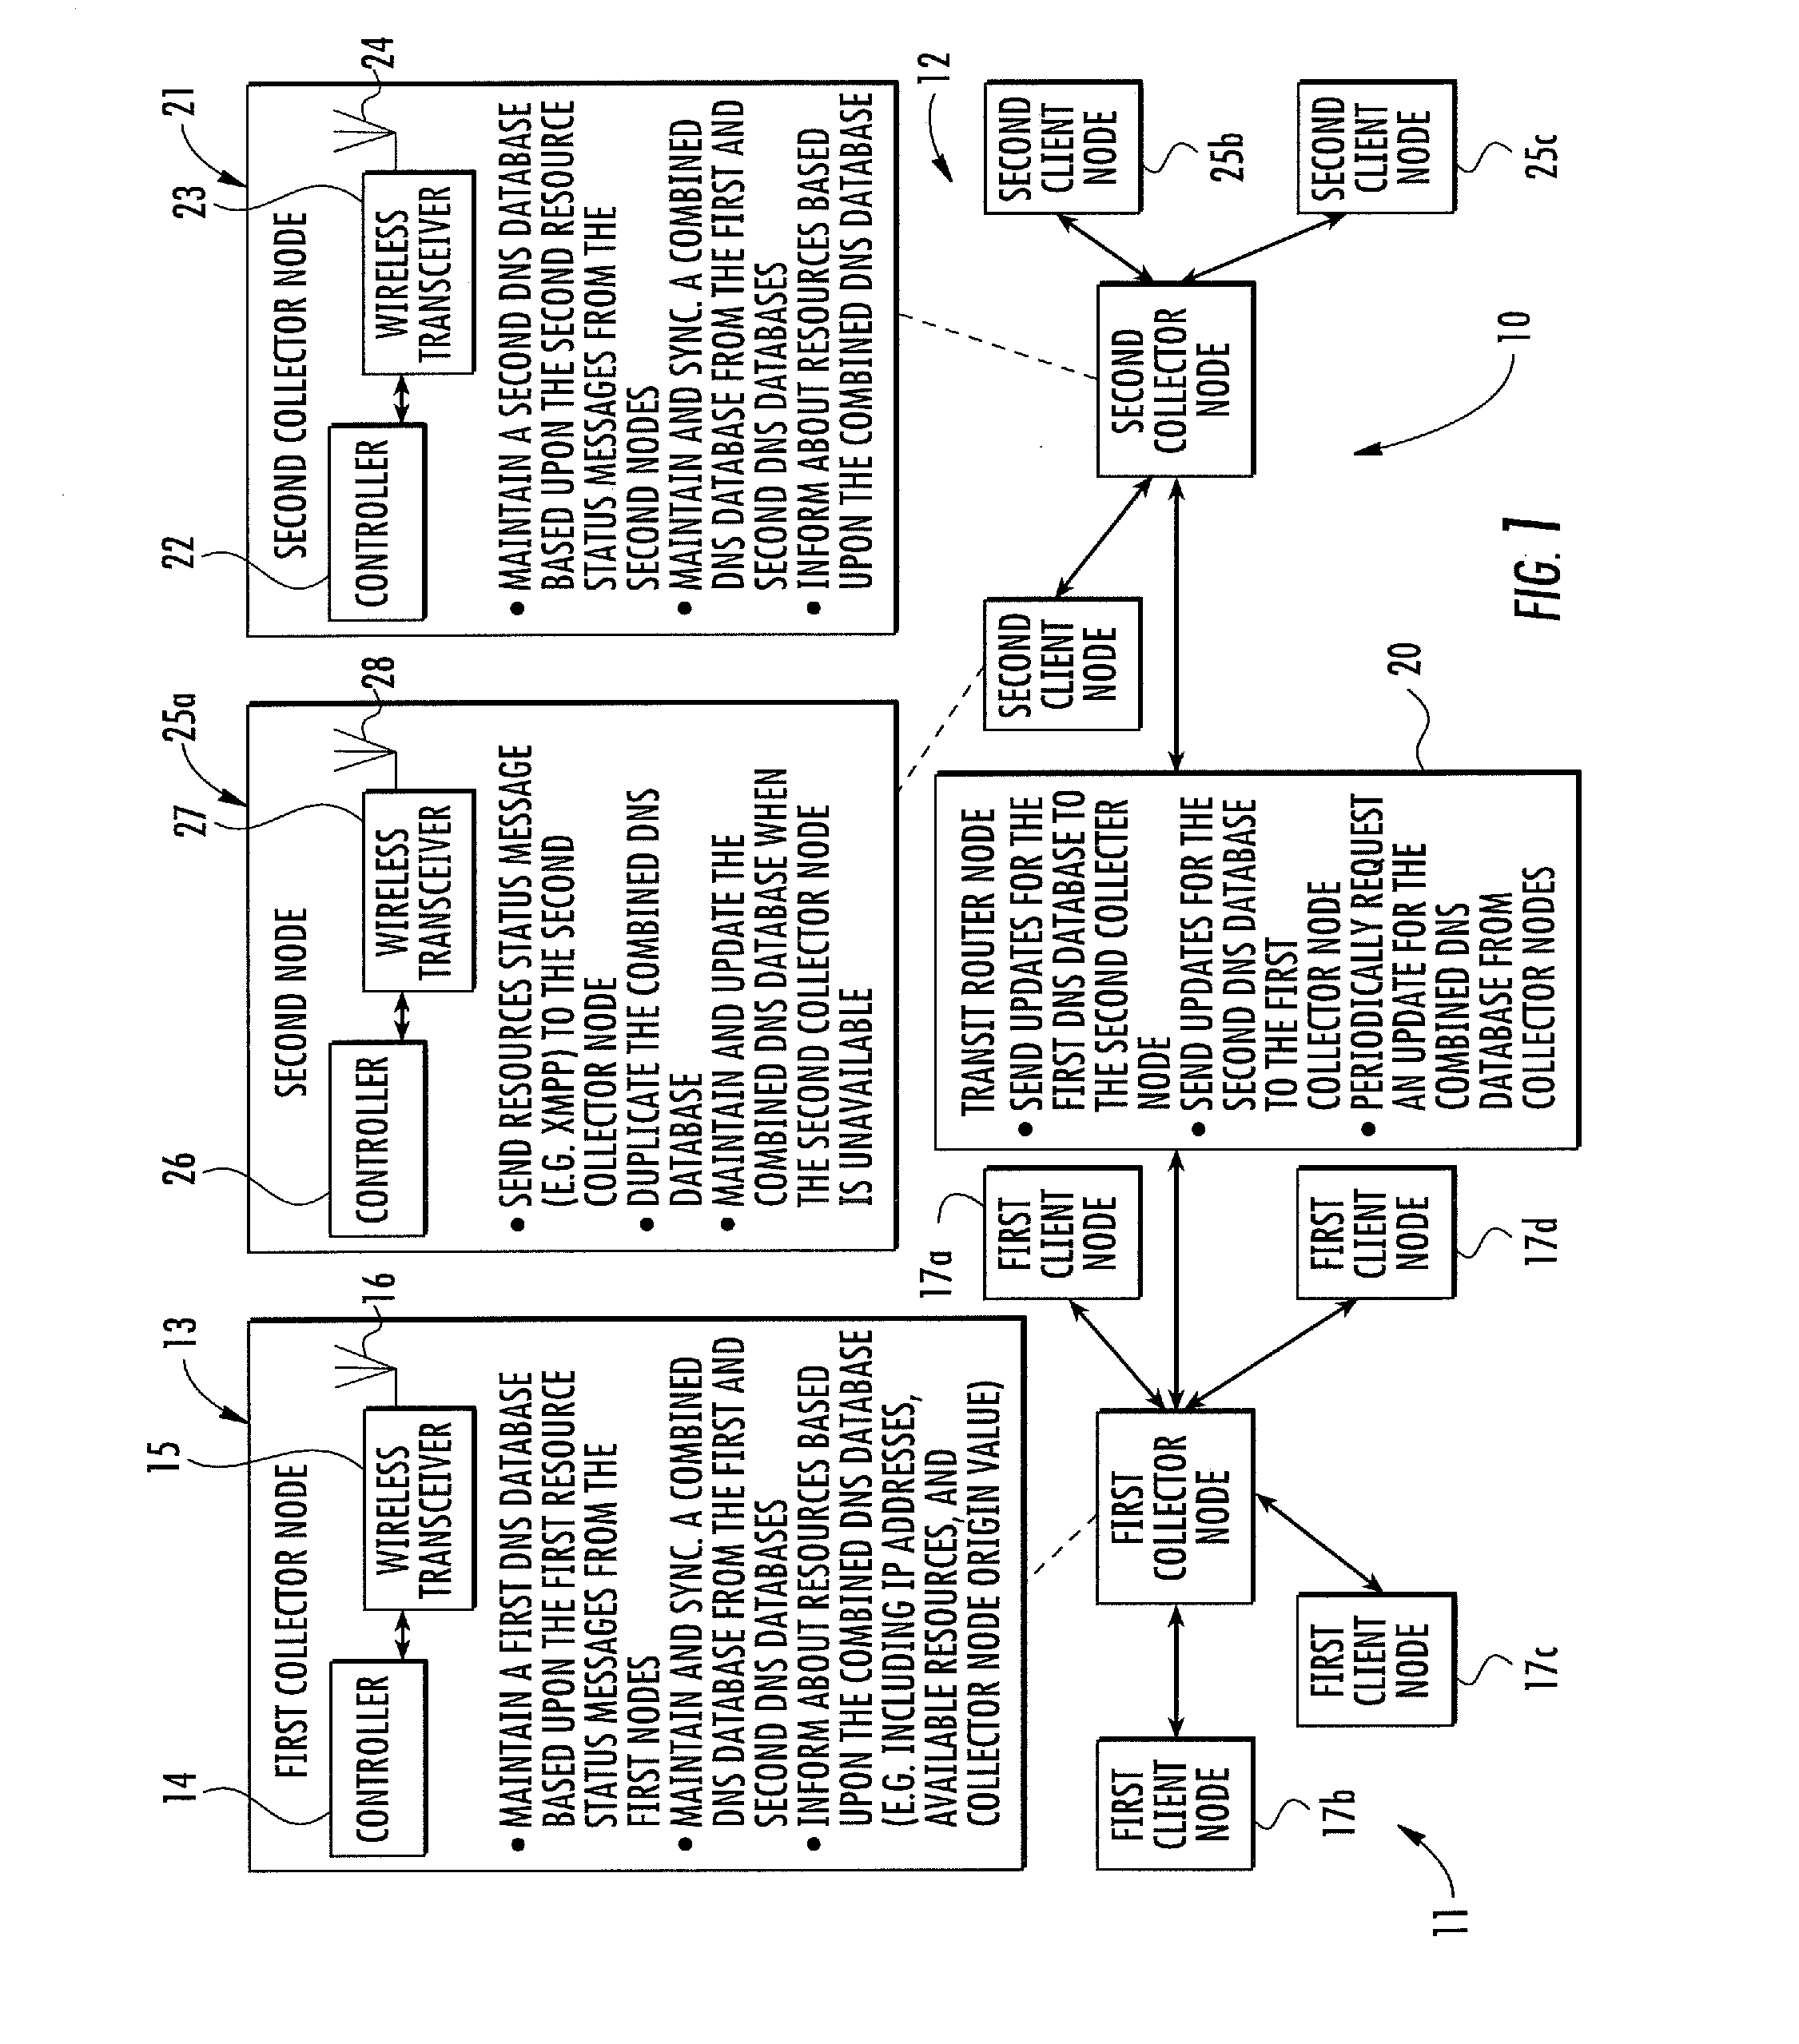 Manet with DNS database resource management and related methods